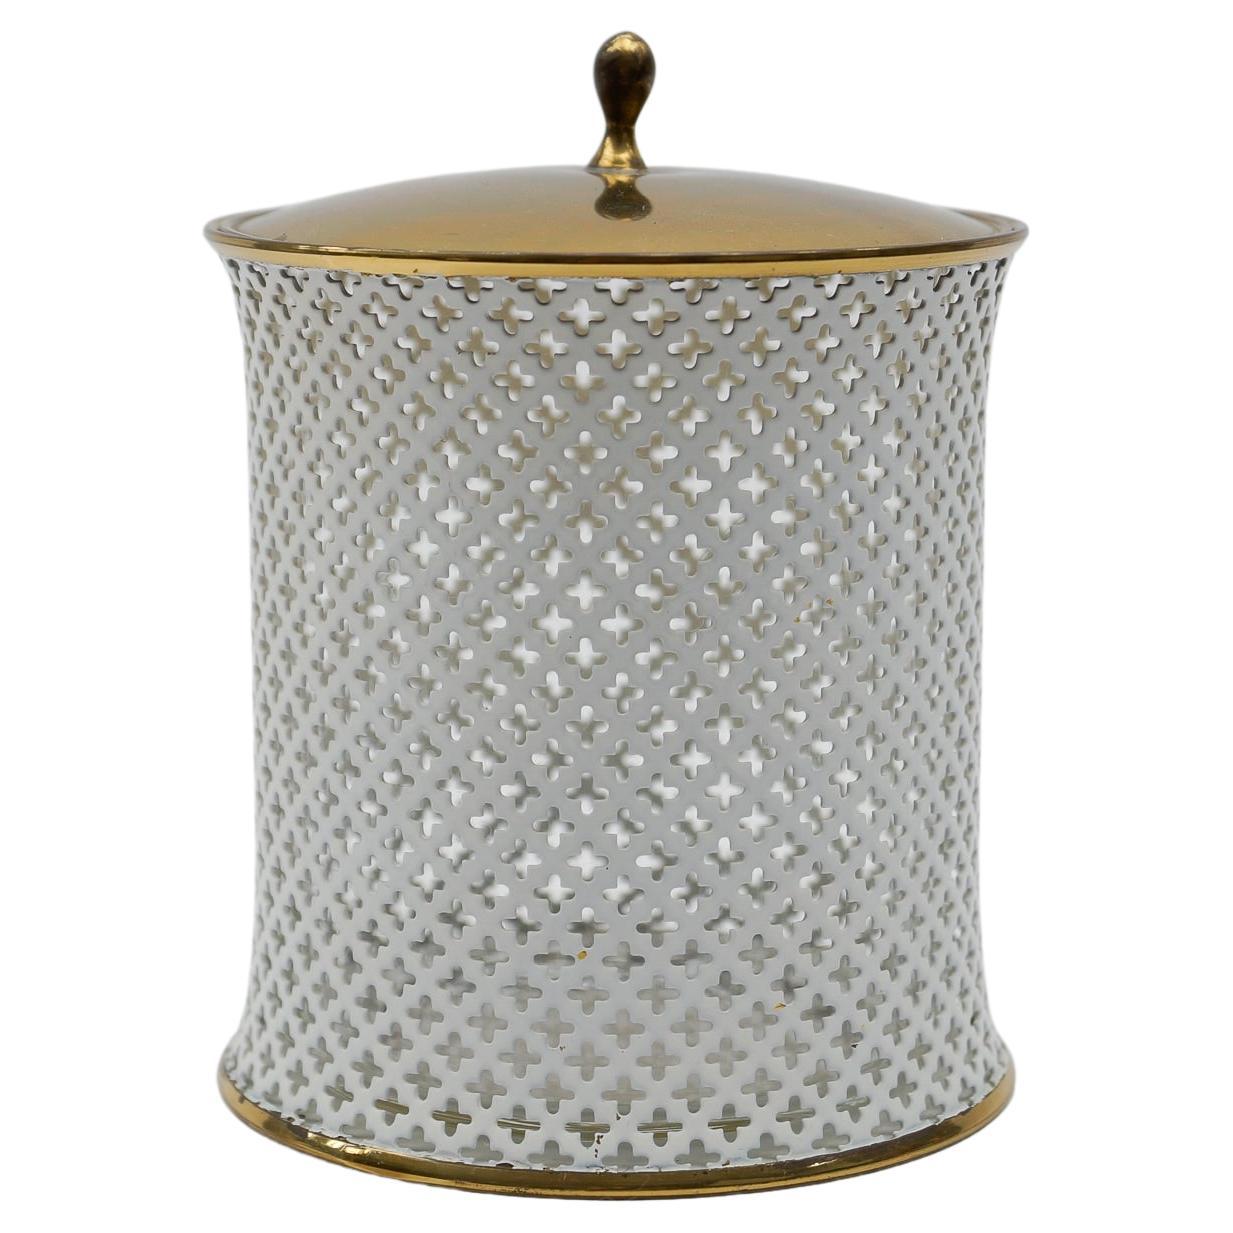 Stylish perforated metal, brass and glass mategot style cosmetic lidded tin 